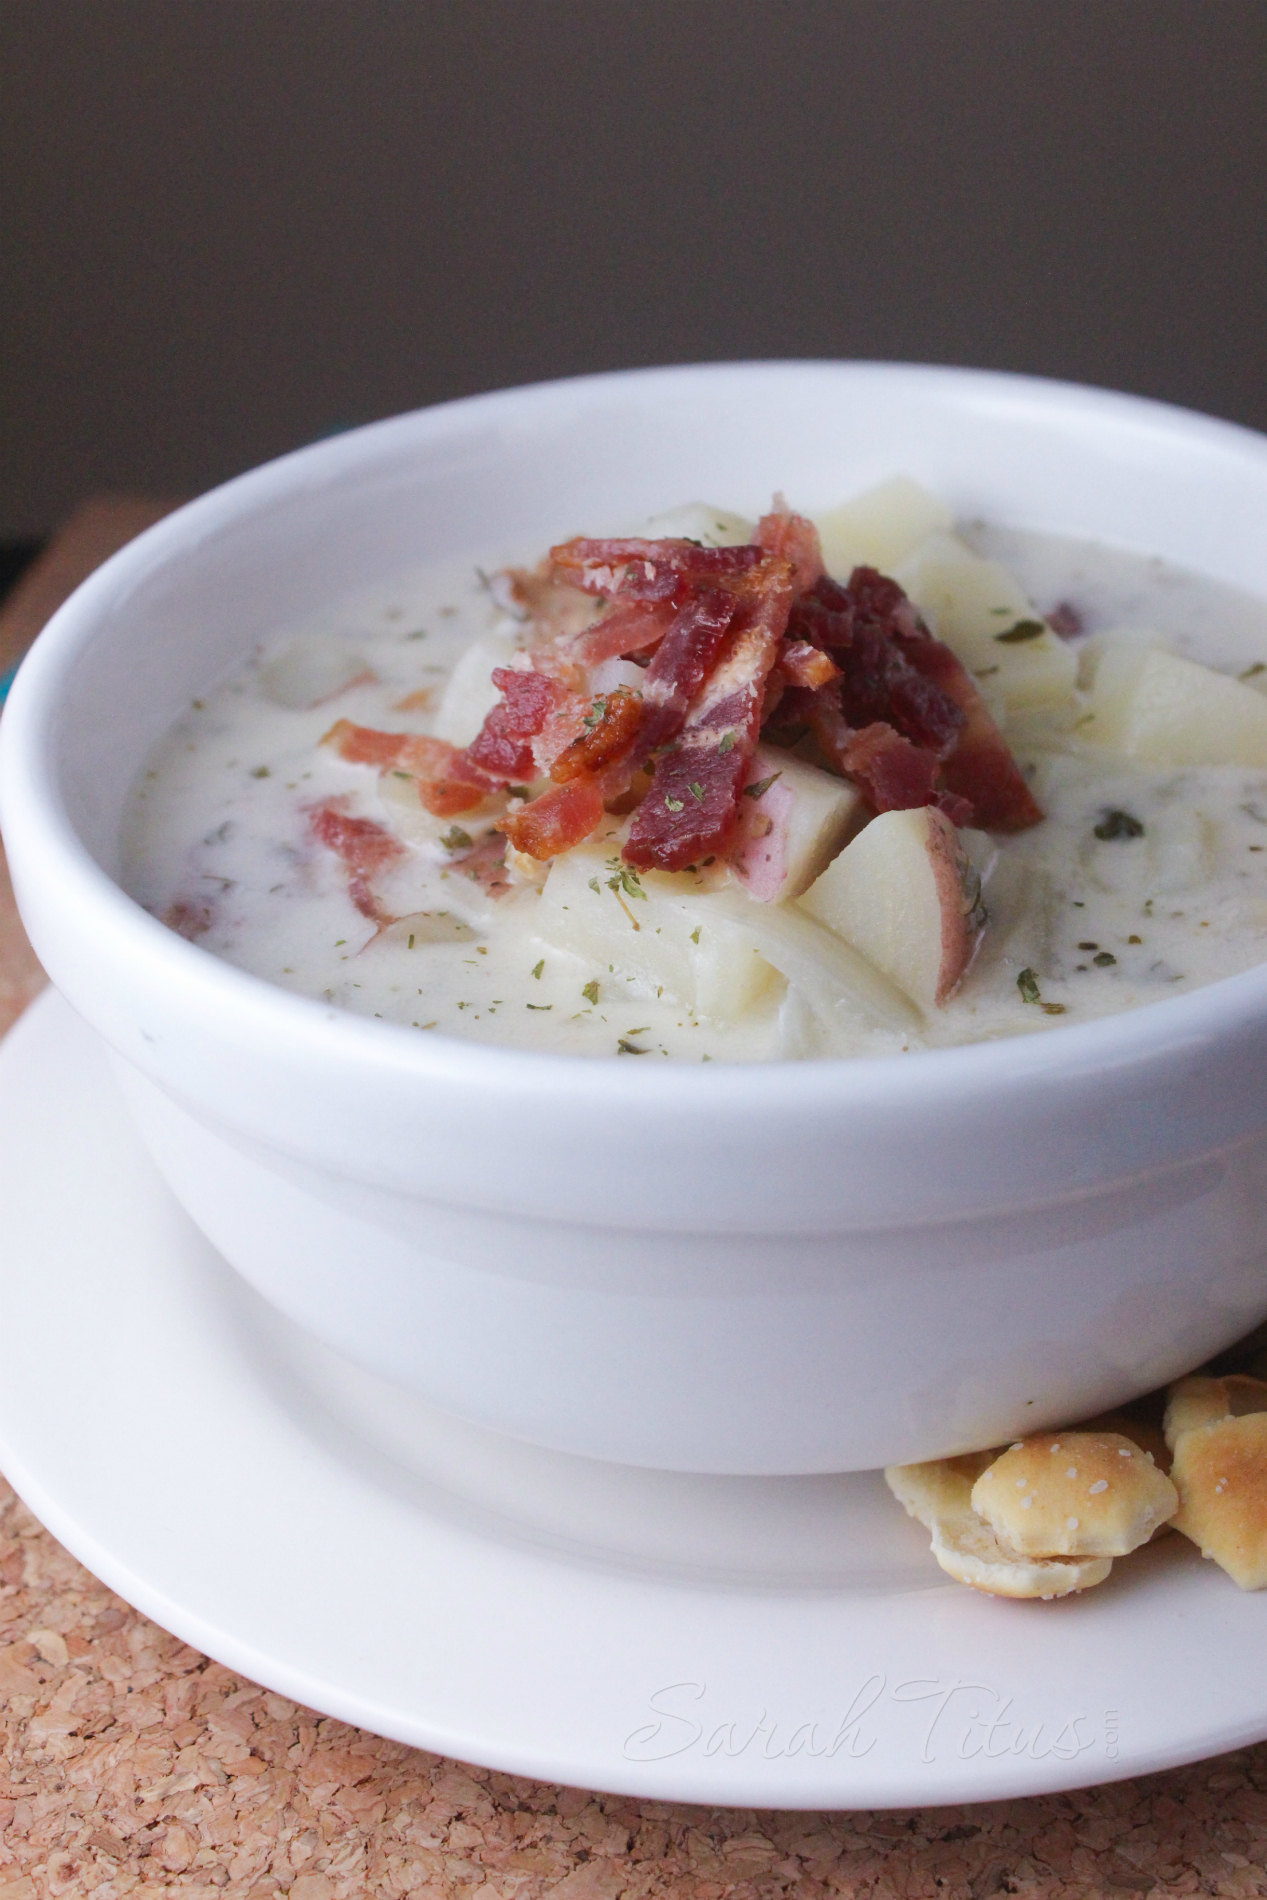 I have traveled my fair share and I've come across places that claim to have the World's Best Clam Chowder, and I'm sorry to tell them, mine's better...BY FAR!